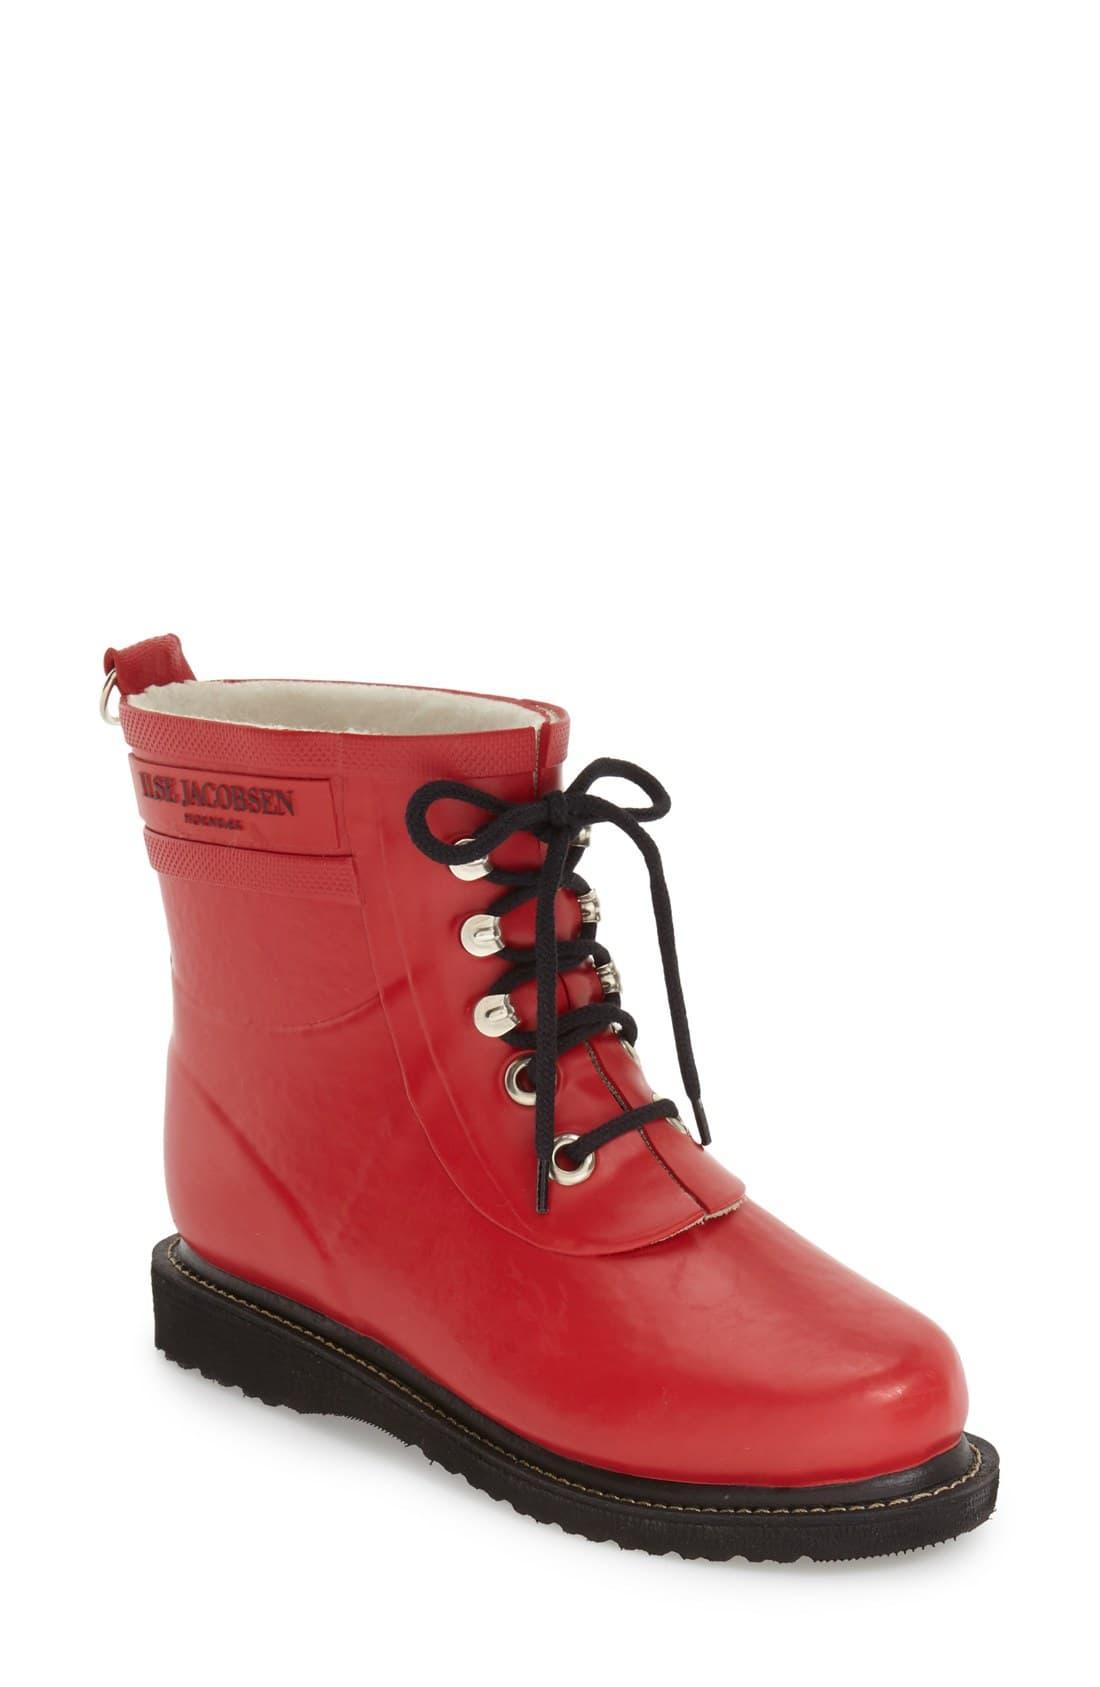 Ilse Jacobsen Fleece 'rub' Boot in Deep Red (Red) - Save 25% - Lyst